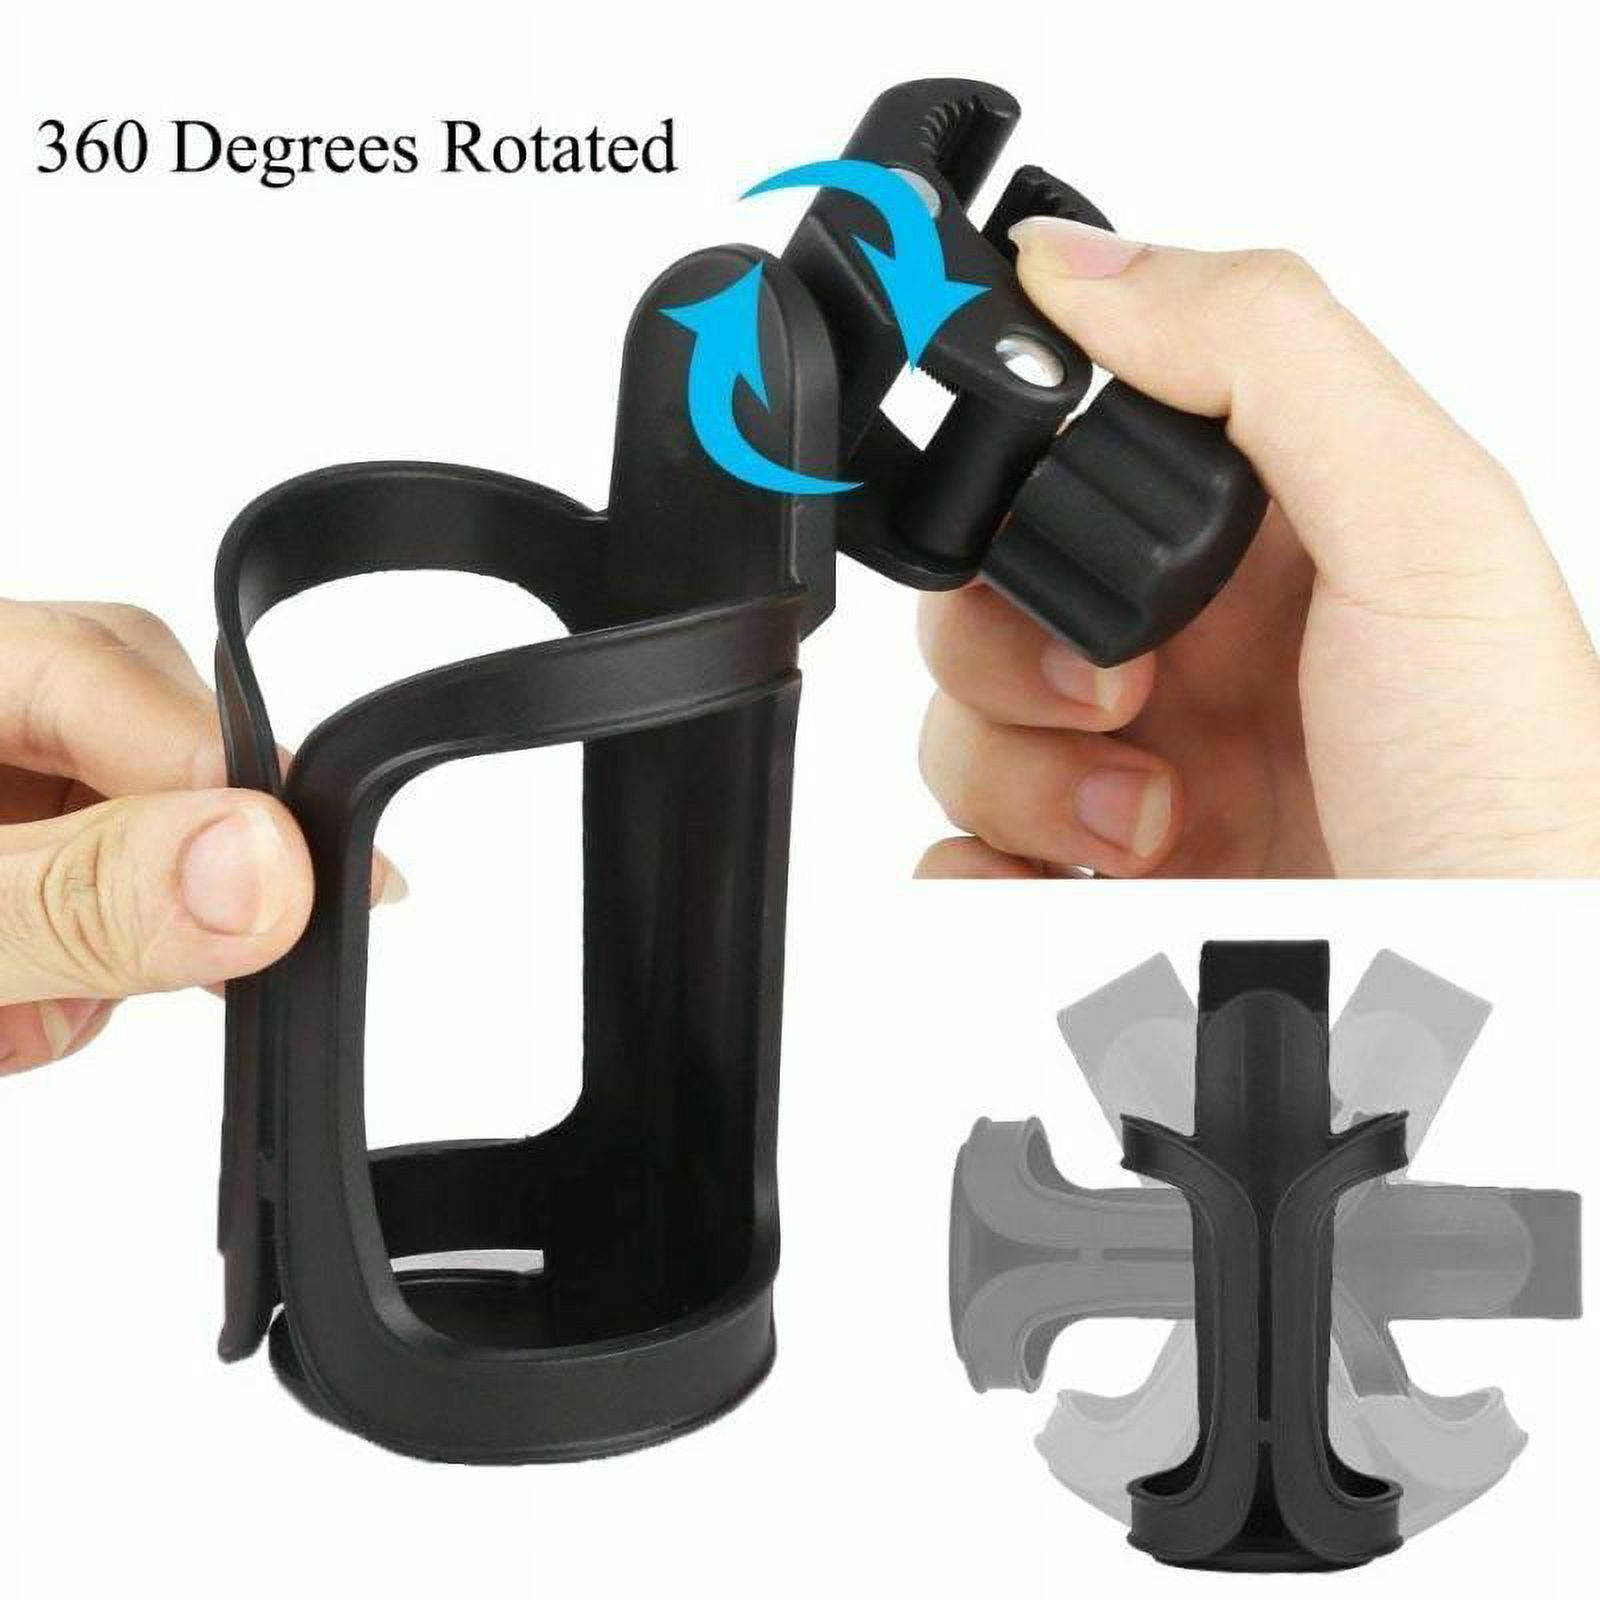 LNKOO Bike & Motorcycle Water Bottle Holder No Screws Adjustable Bicycle Handlebar Mount Cup Cage Compatible with 60-80mm Water Cup Bicycle Water Toughness Road Cycling Bottle Holder - image 2 of 8